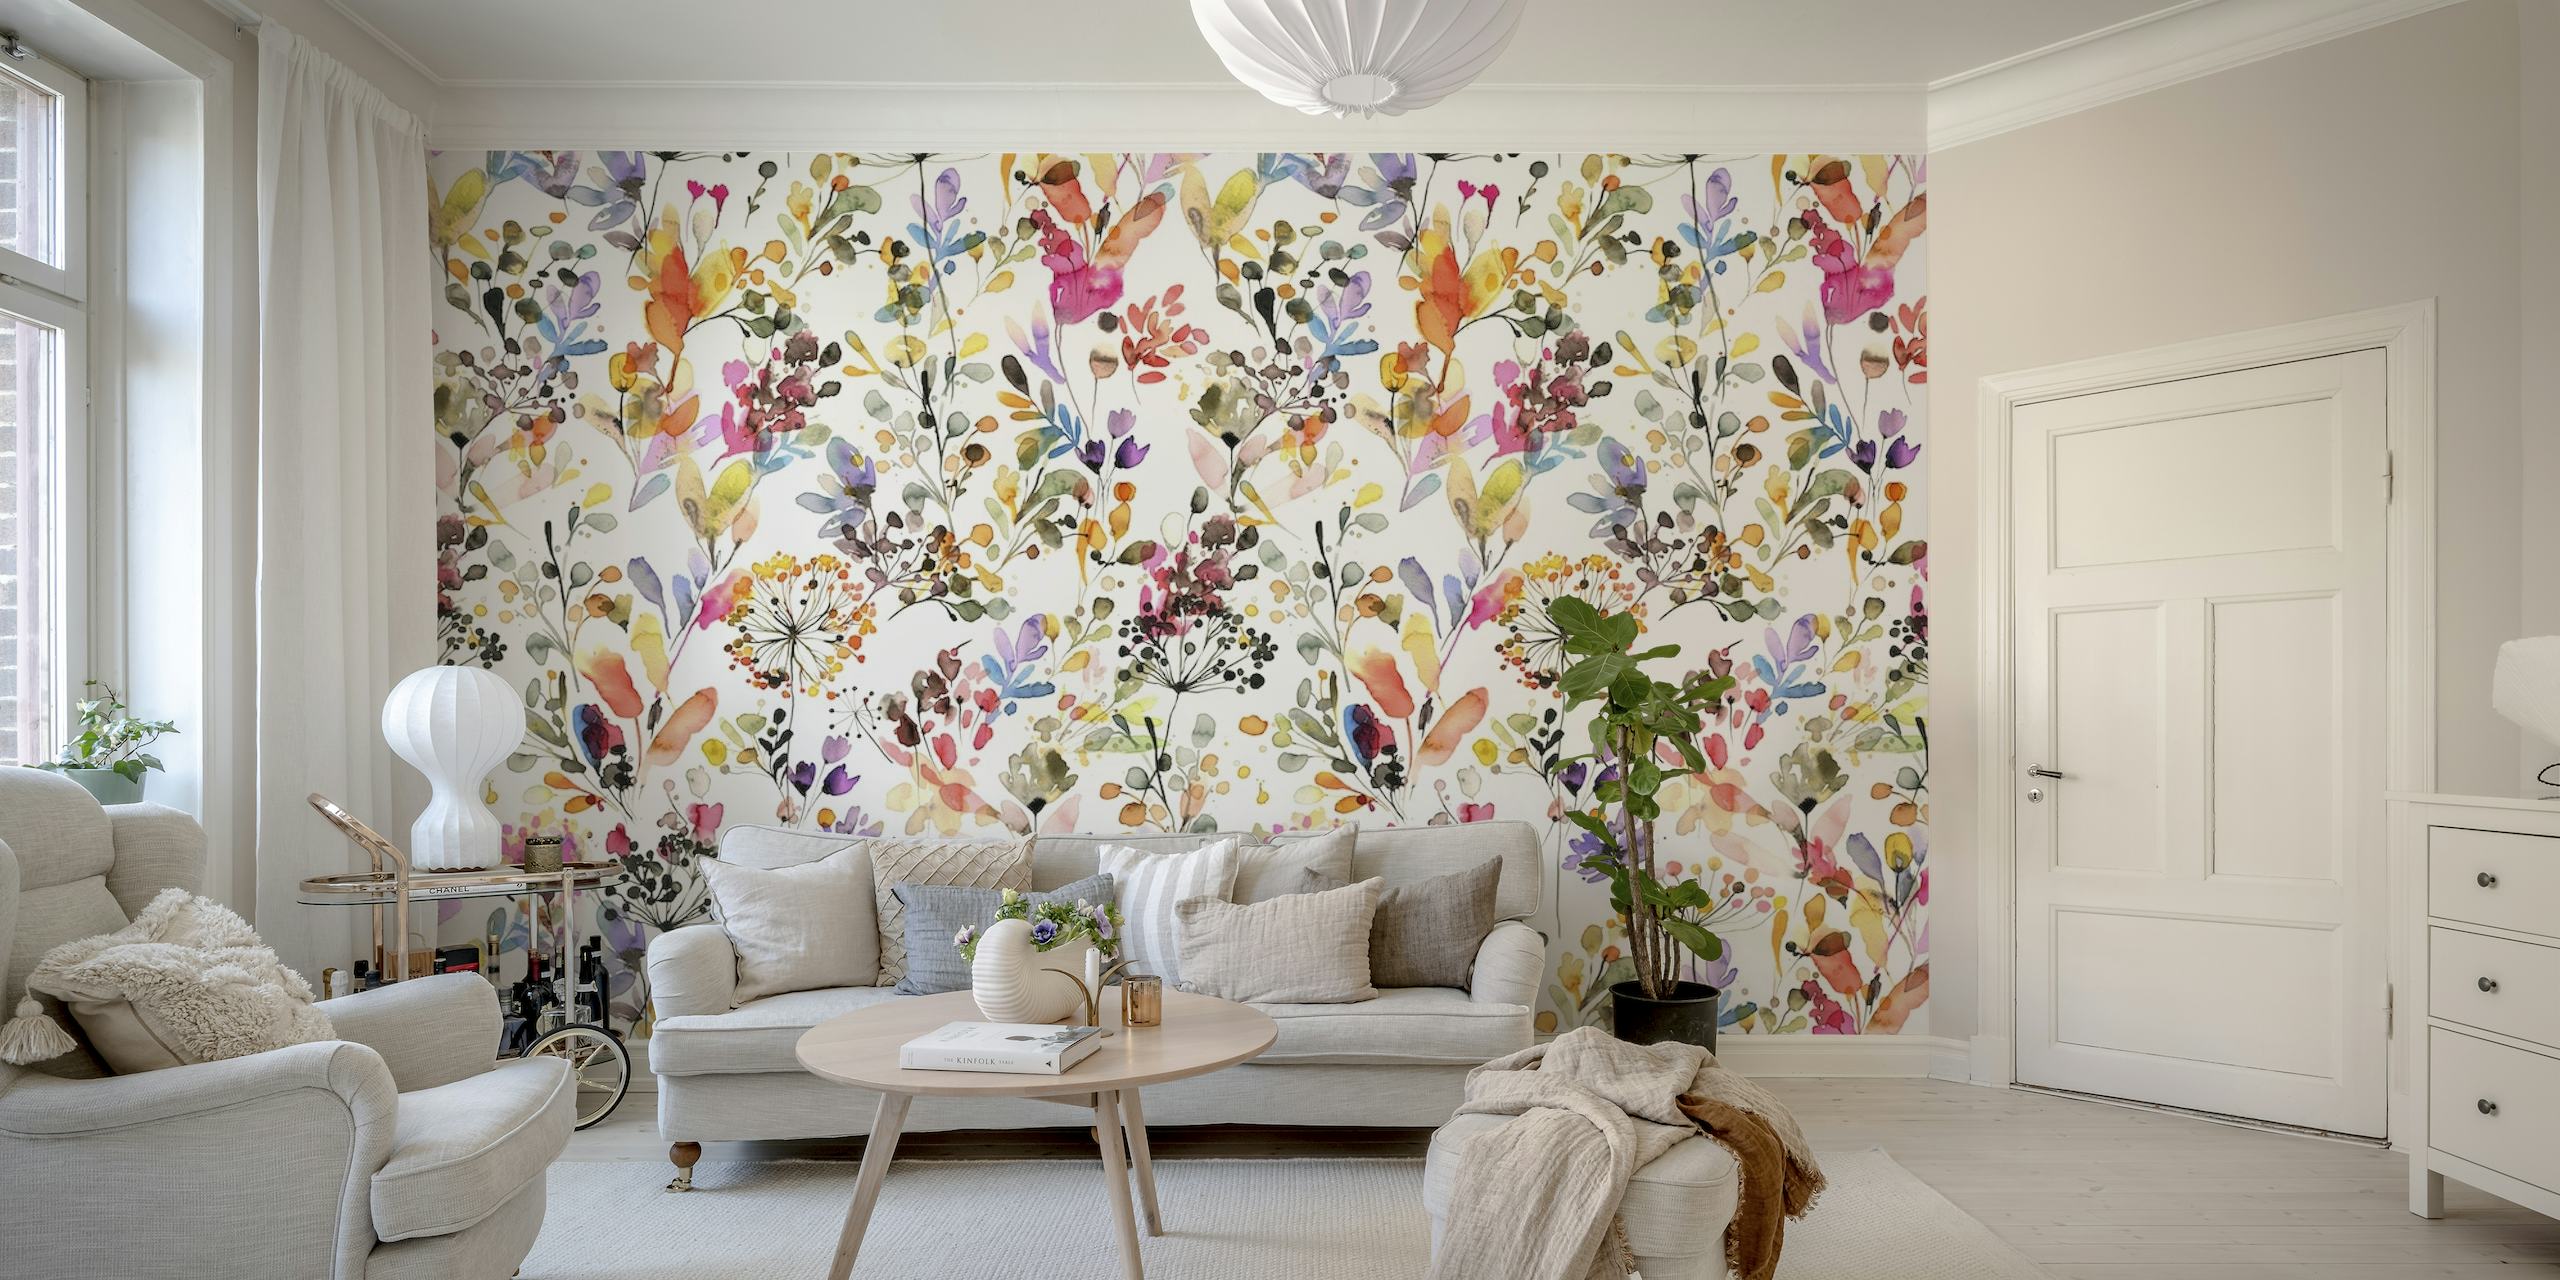 Botanical wall mural featuring a pattern of wild grasses and colorful flowers on a neutral background